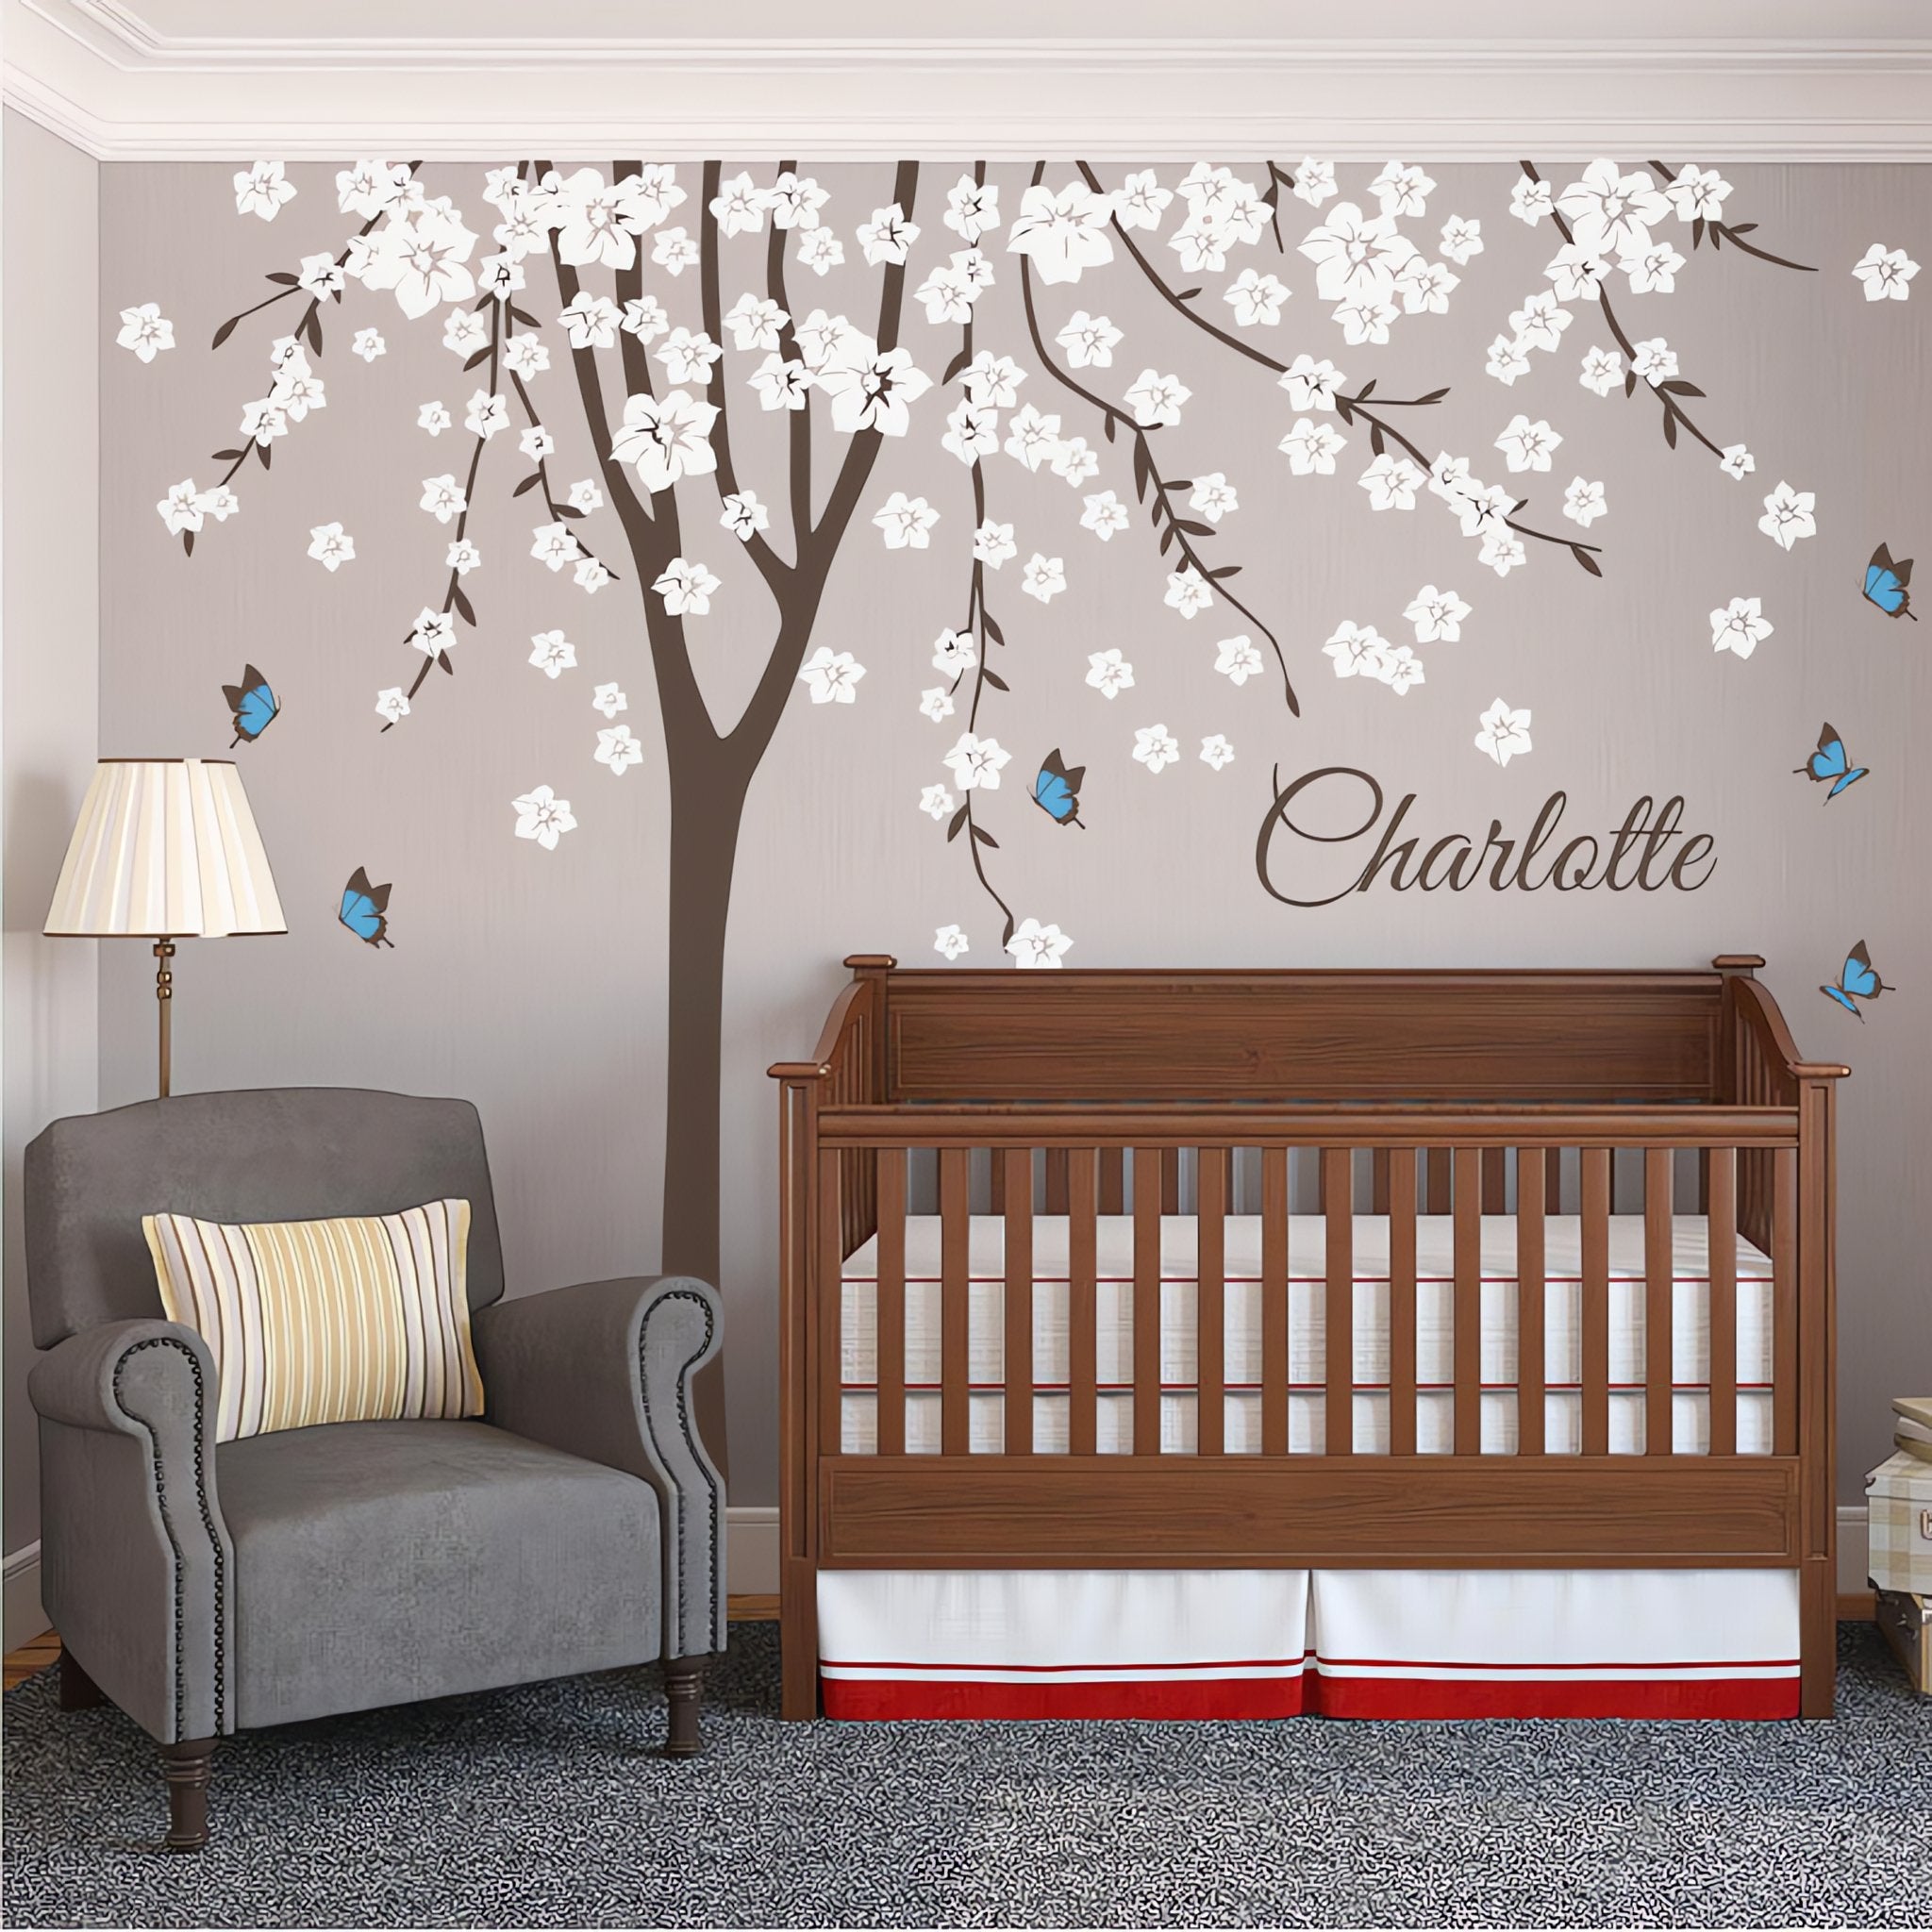 Tree wall sticker with blossoming leaves, butterflies and the name of a loved one in a nursery with a crib and an armchair.